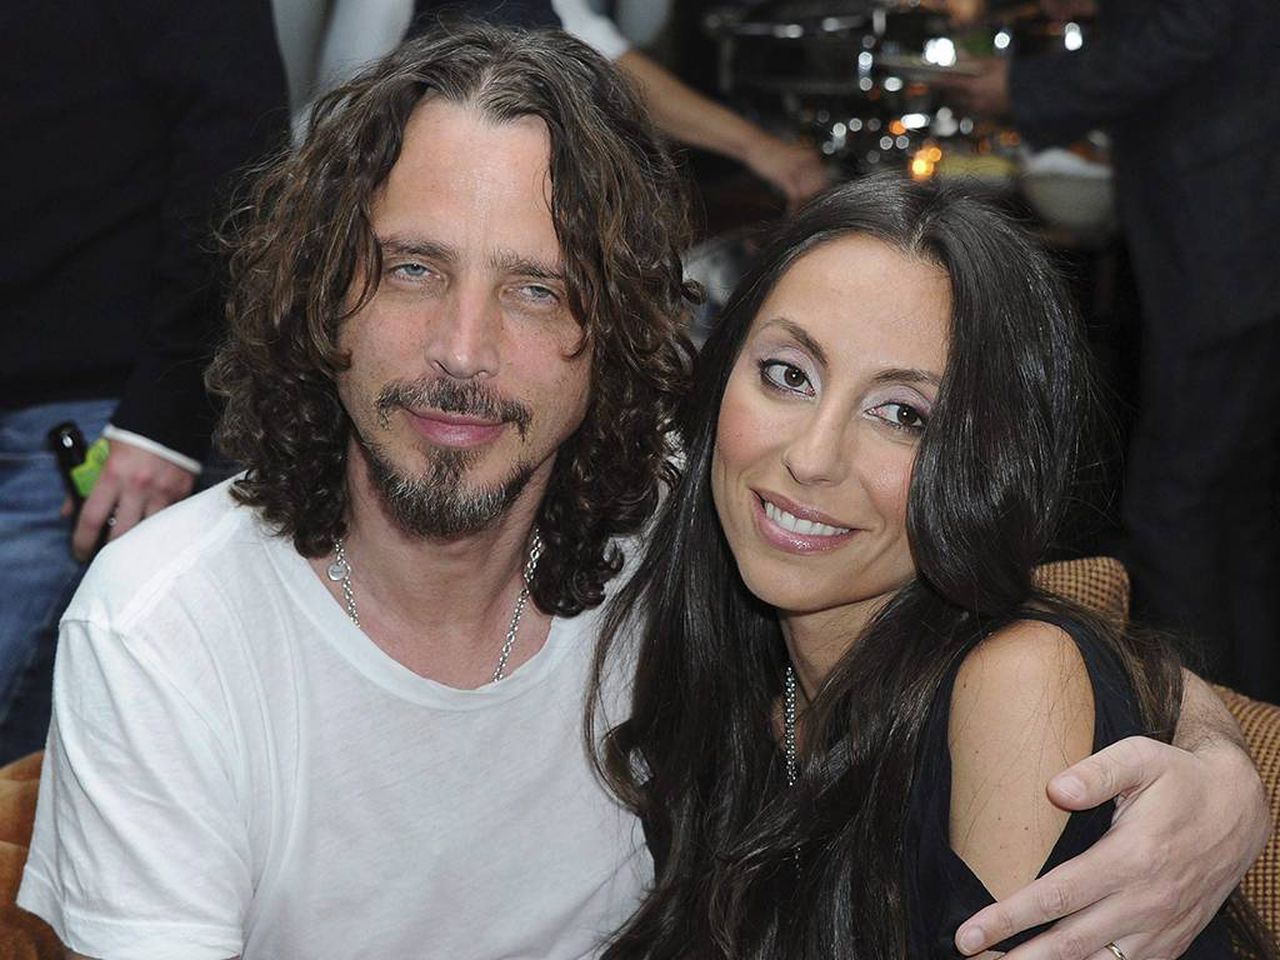 Vicky Cornell is taking legal action against Soundgarden over unpaid royalties. Image via AP.